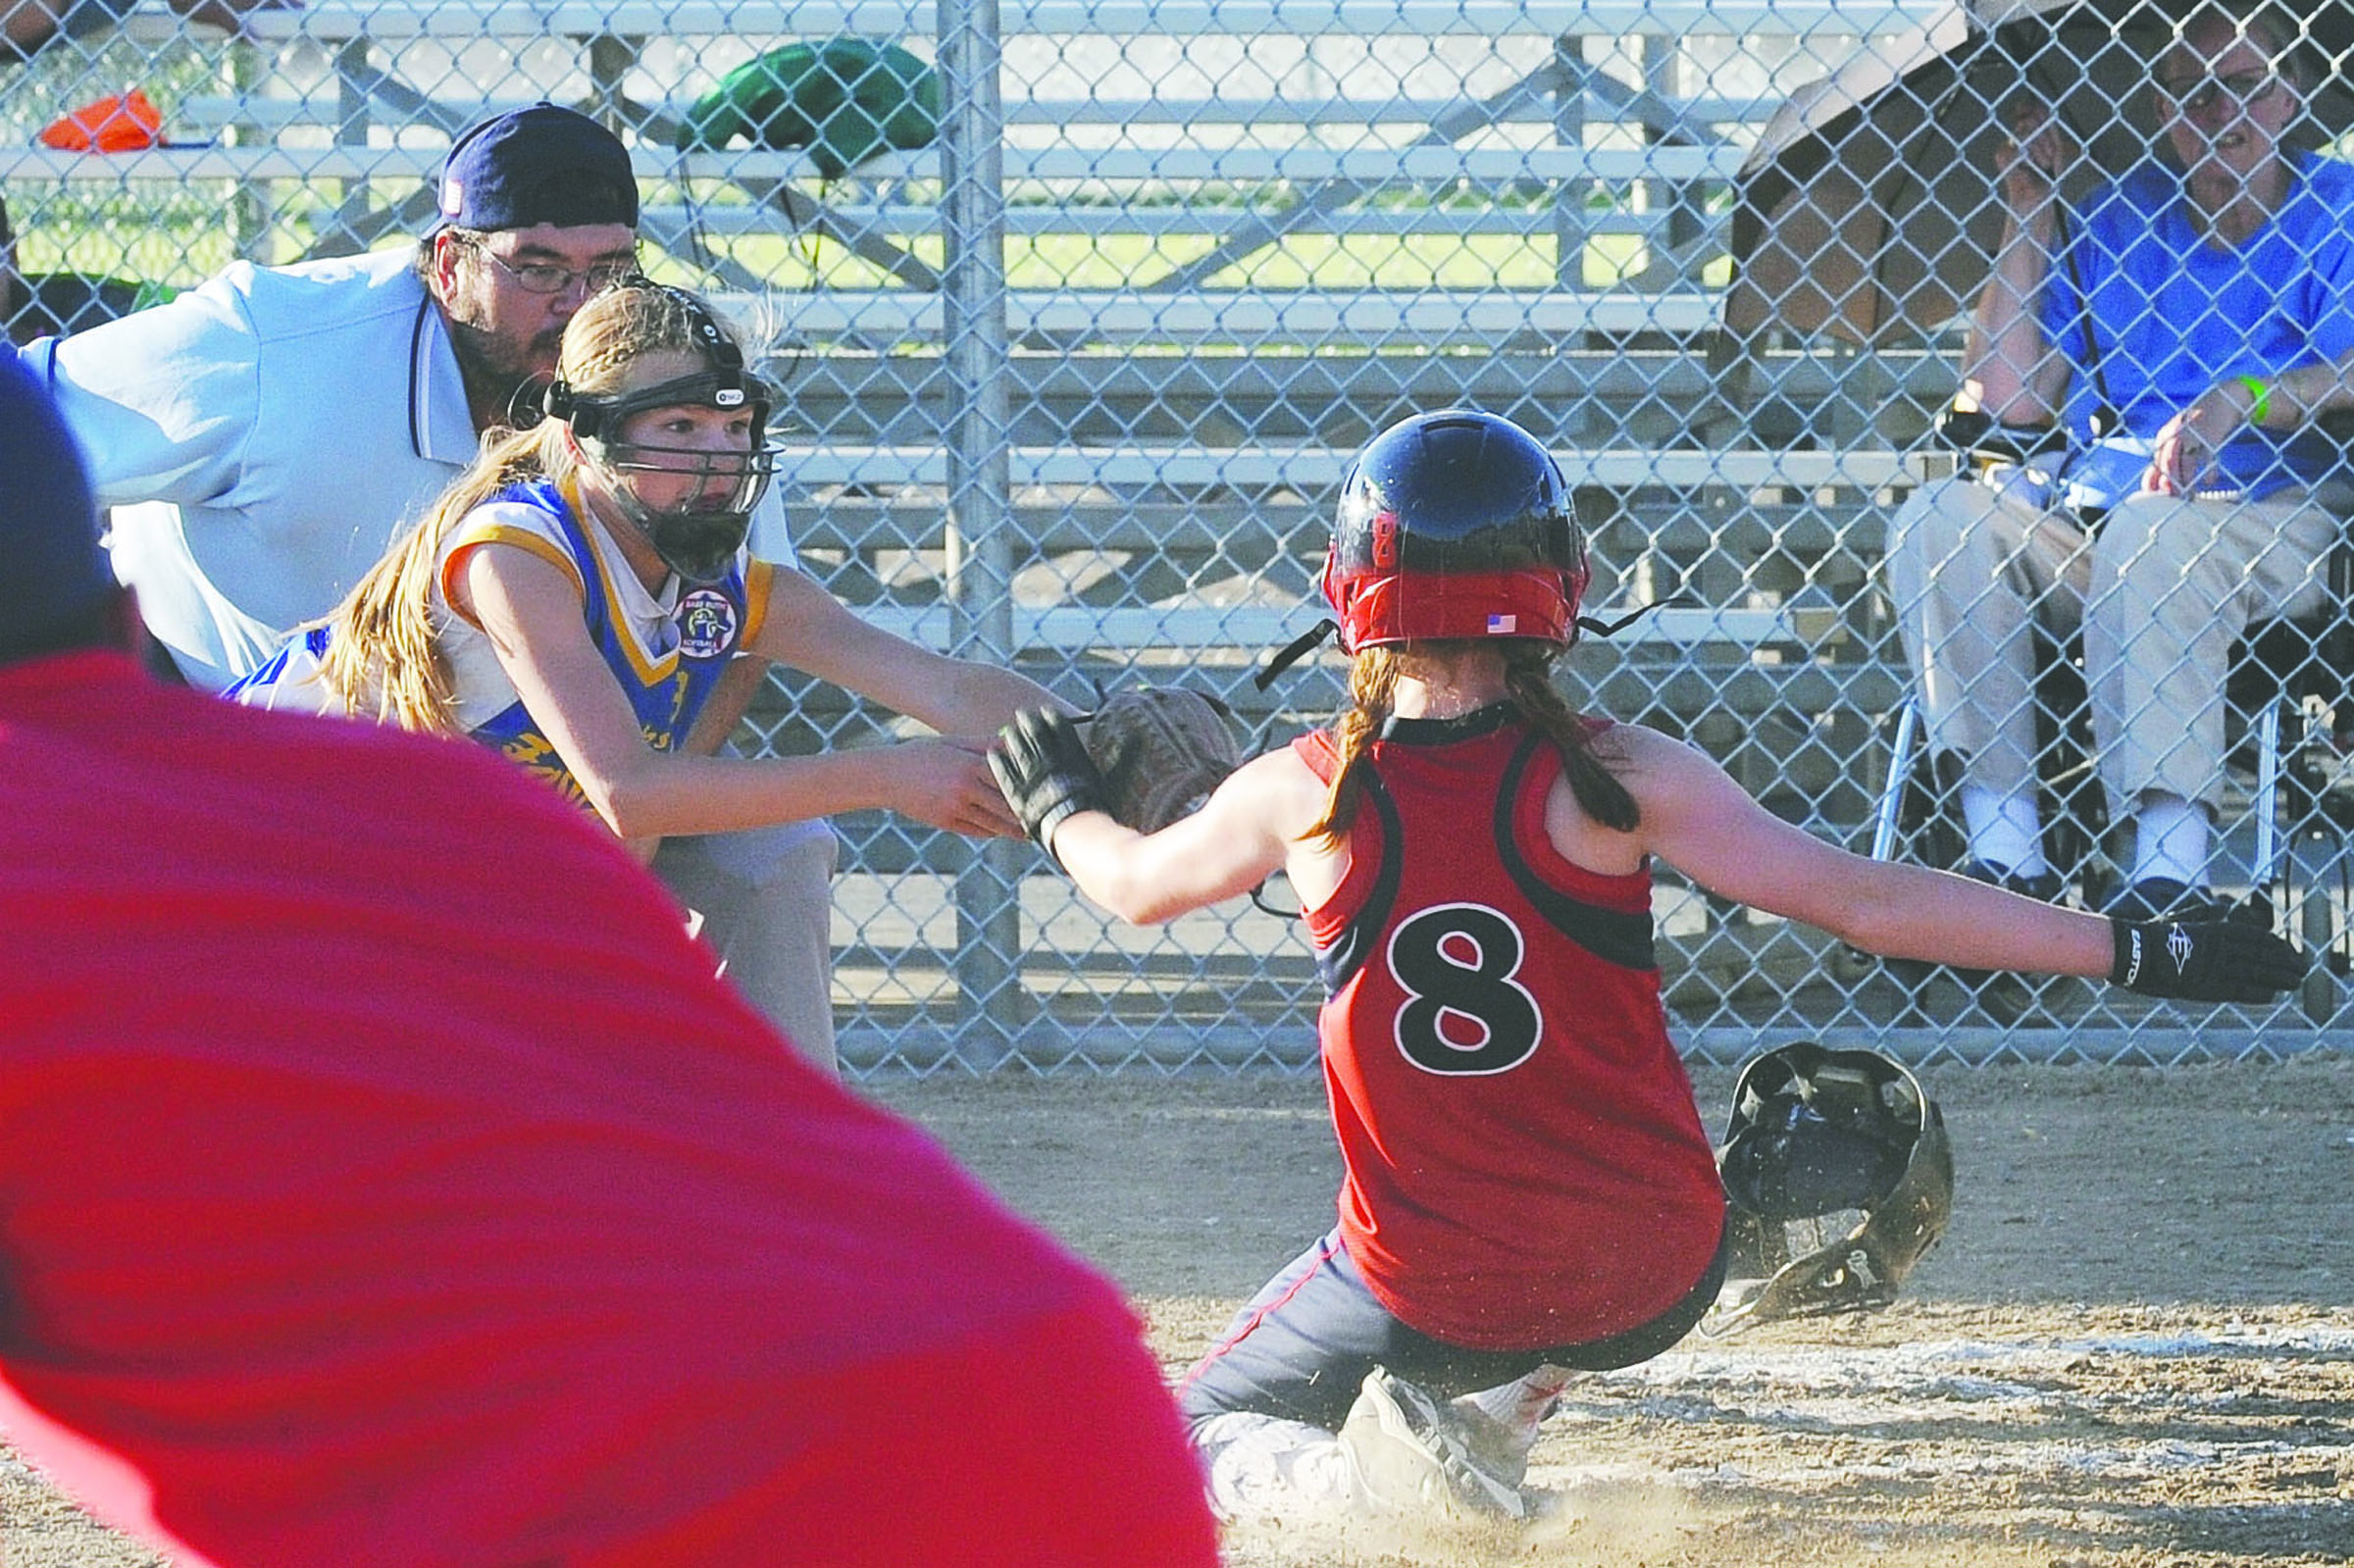 Forks 10U pitcher Jayden Olson covers home to tag out a Hoquiam runner during pool play earlier in the state tournament in Othello. Forks beat Hoquiam 12-2 this time and then defeated Hoquiam 3-0 in the championship game Sunday. Lonnie Archibald/for Peninsula Daily News